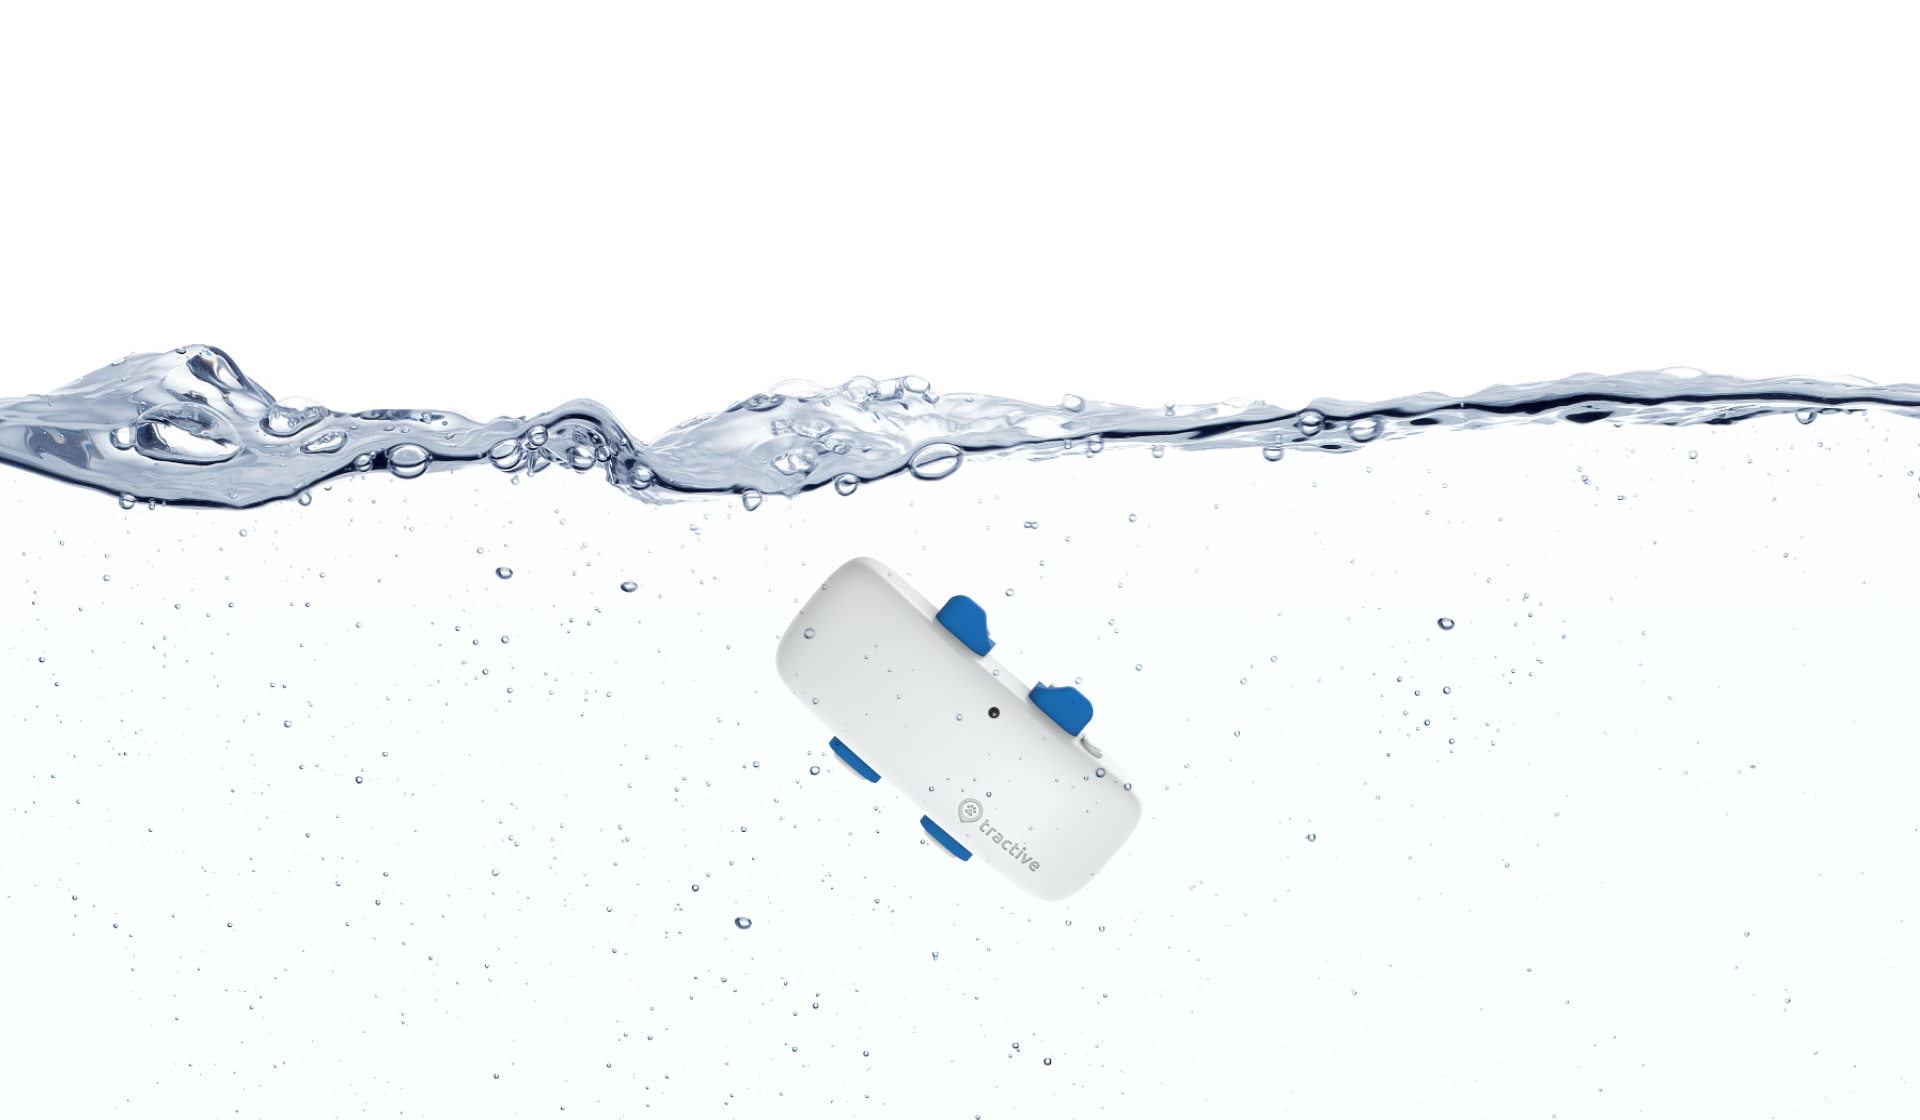 The Tractive GPS tracker under the water.